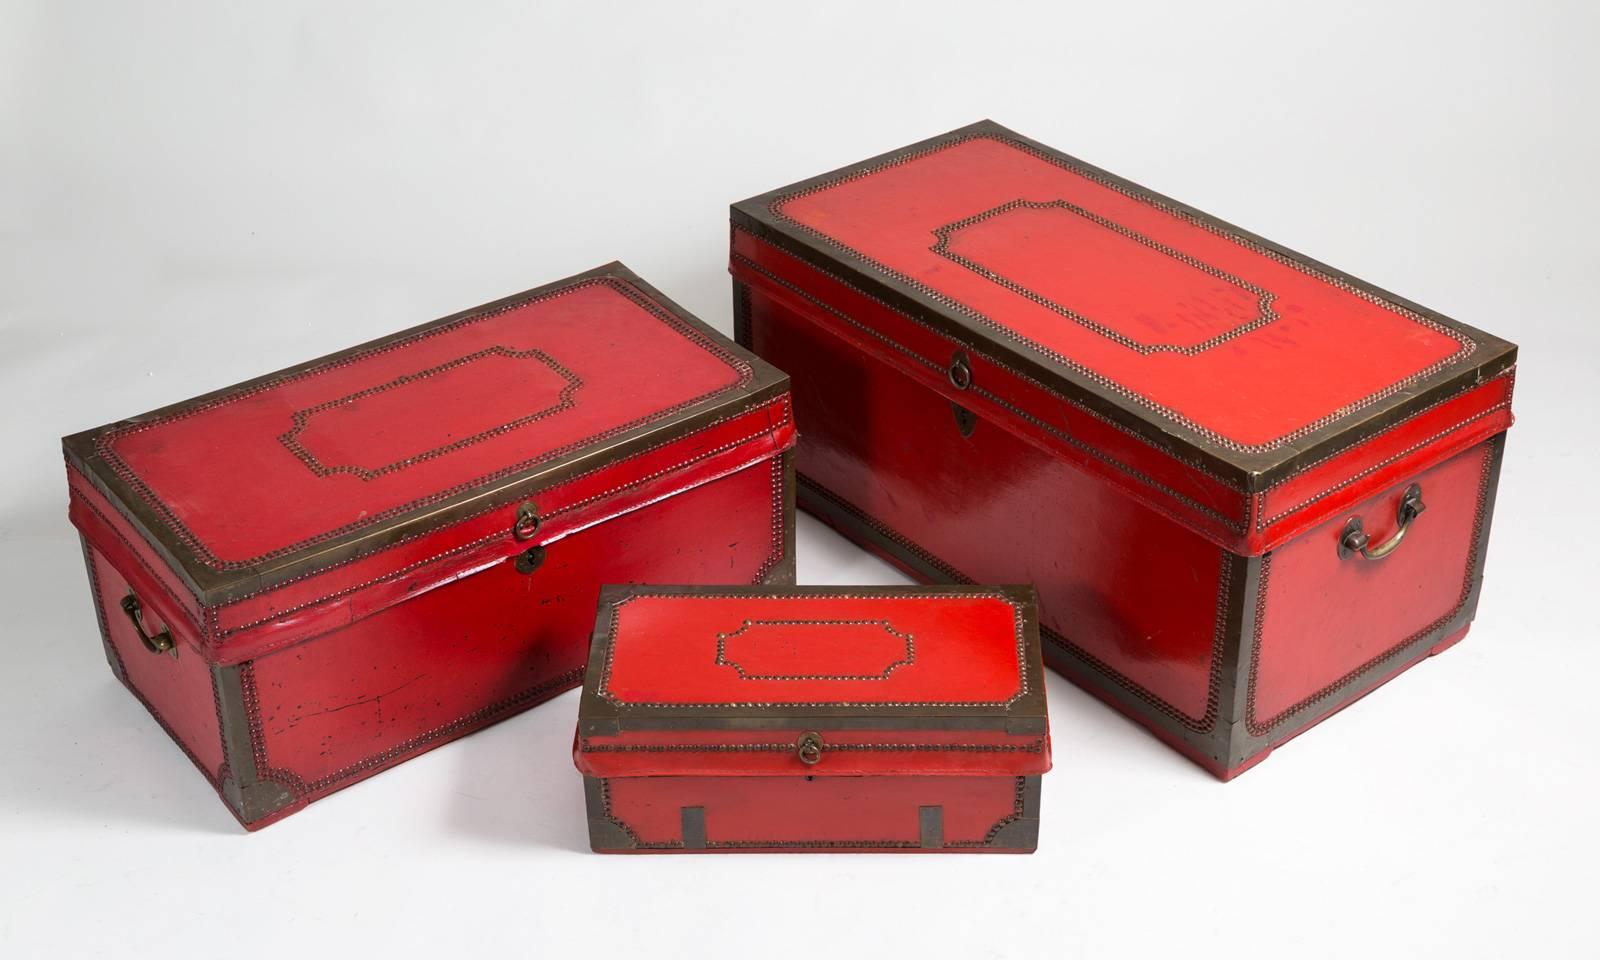 Set of three Chinese export red lacquered leather and brass bound camphor wood trunks, the tops decorated with brass nailheads in shield shapes with brass carrying handles on the sides. They all fit inside each other. The largest trunk’s